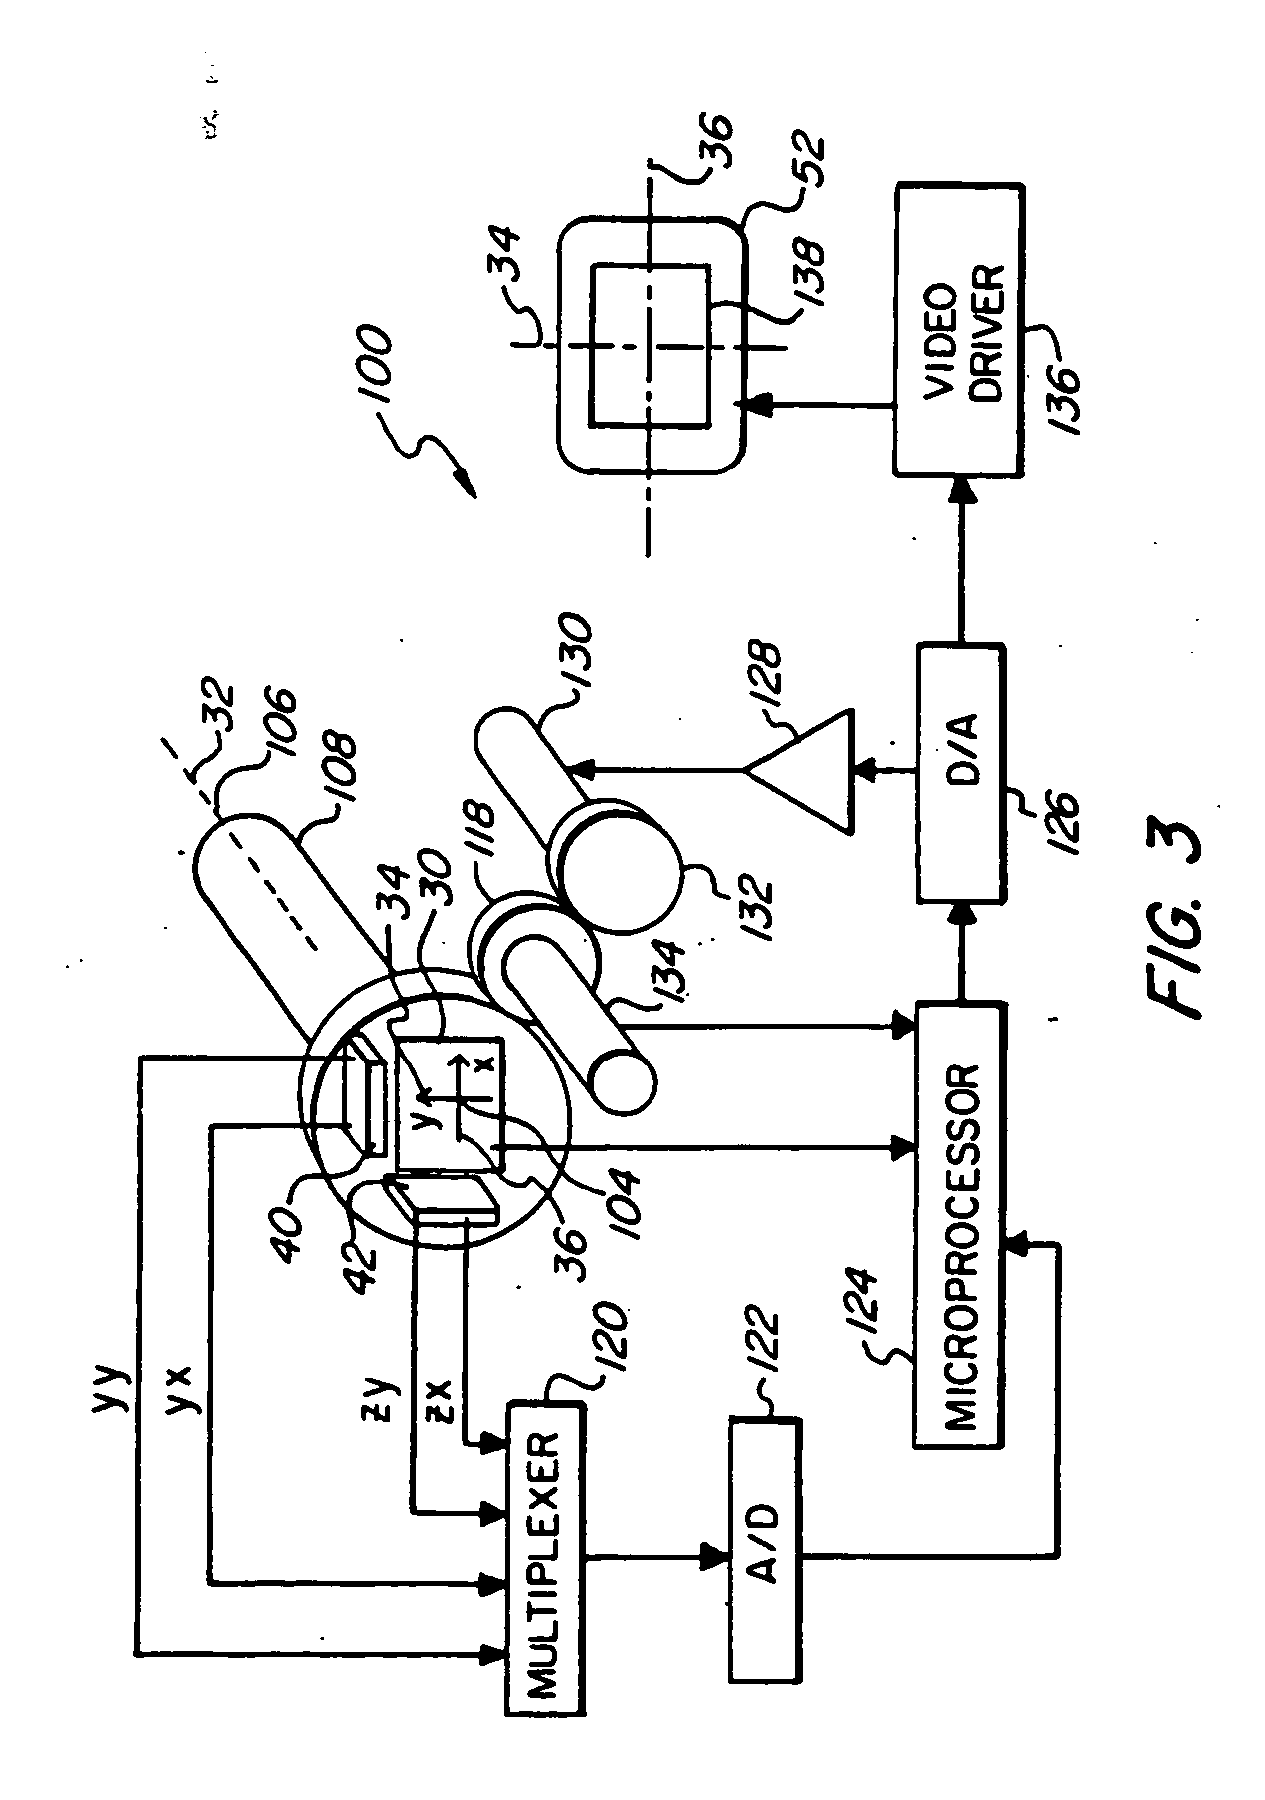 Image orientation for endoscopic video displays